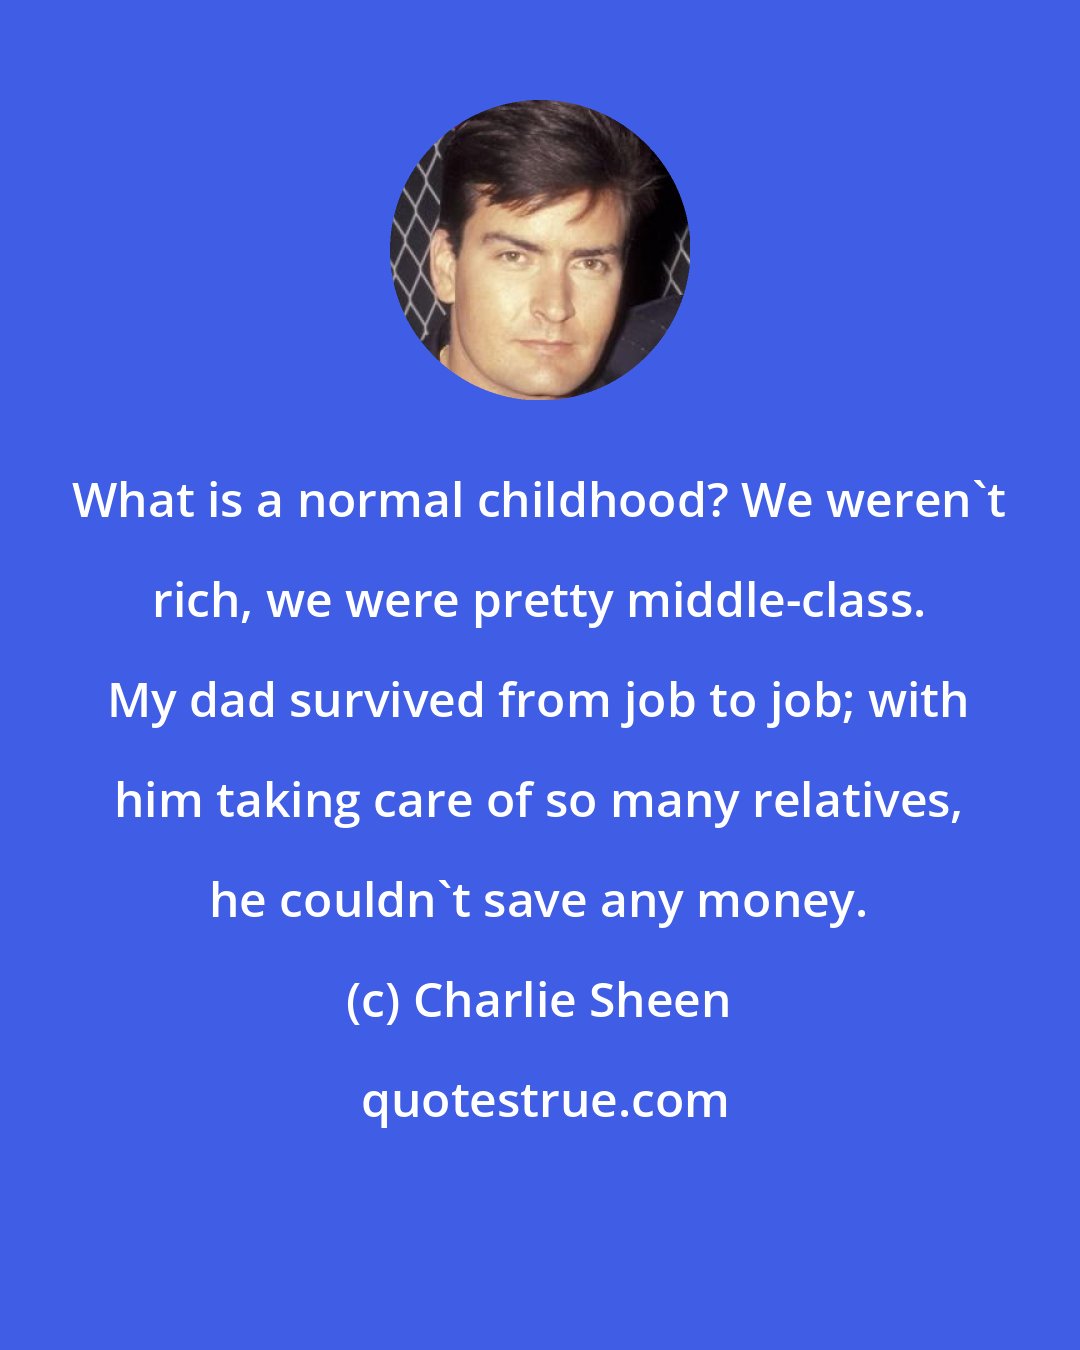 Charlie Sheen: What is a normal childhood? We weren't rich, we were pretty middle-class. My dad survived from job to job; with him taking care of so many relatives, he couldn't save any money.